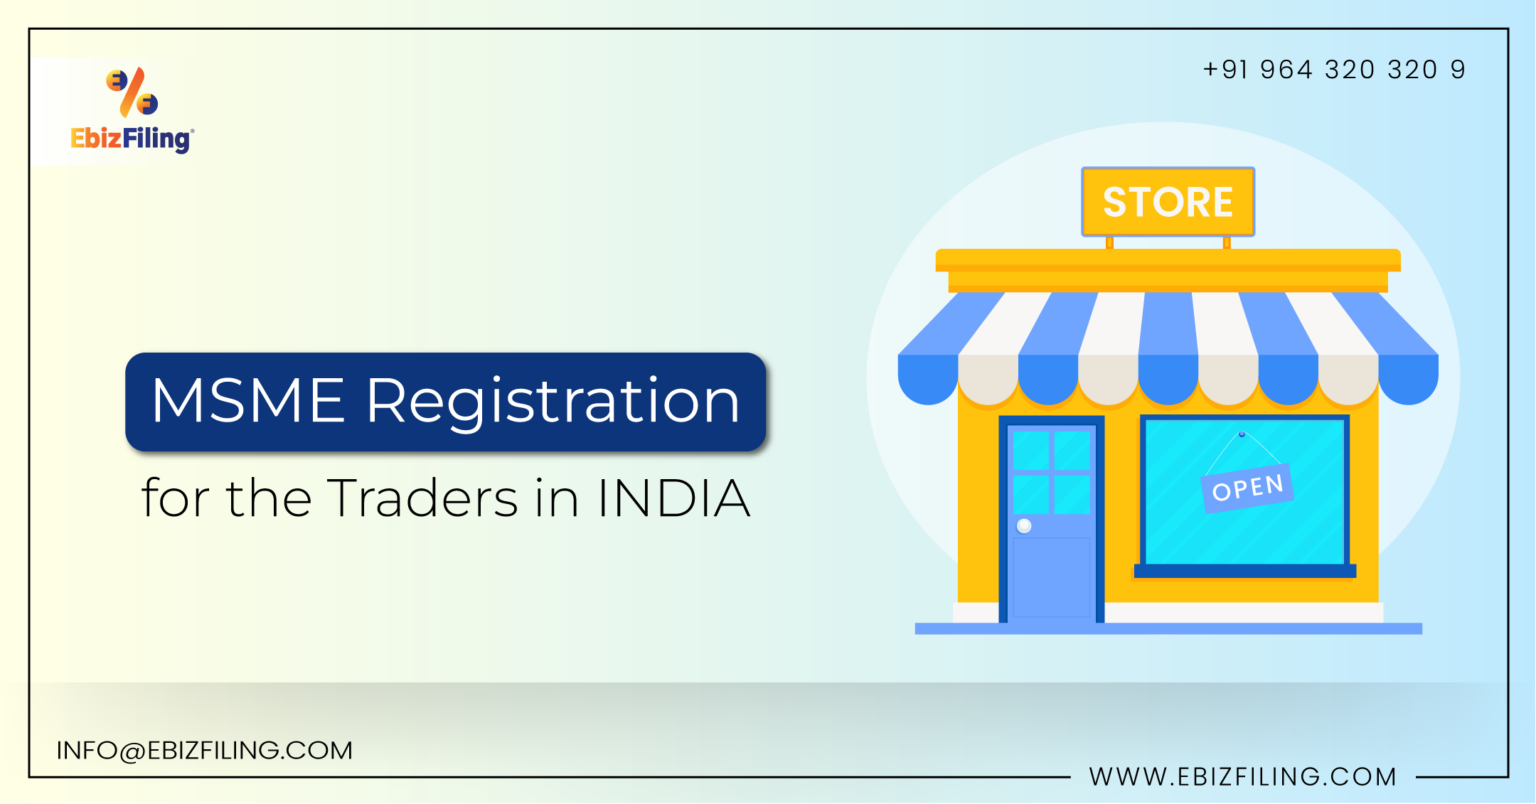 All about MSME Registration for Traders in India